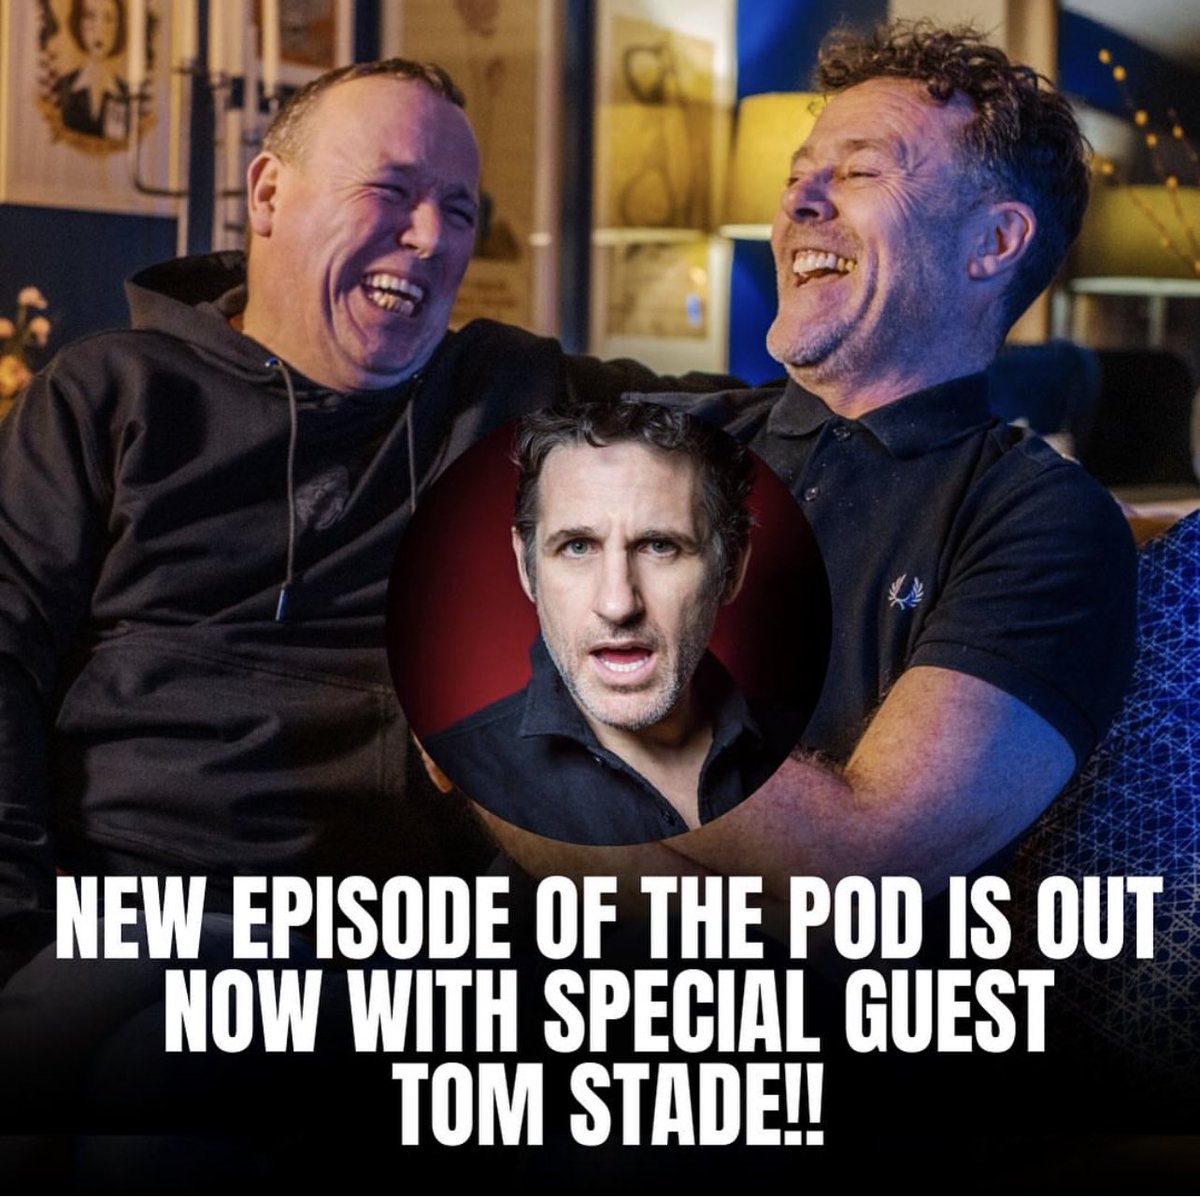 ⭐️ TOM STADE ⭐️ We’ve got an absolute comedy legend on the pod this week - @TomStadeComic 🤩 Willa and Eric chat to Tom about how “wokeness” could ruin comedy, his best and worst gig and some other MAD topics 😂 Listen now on Spotify or Apple Podcasts